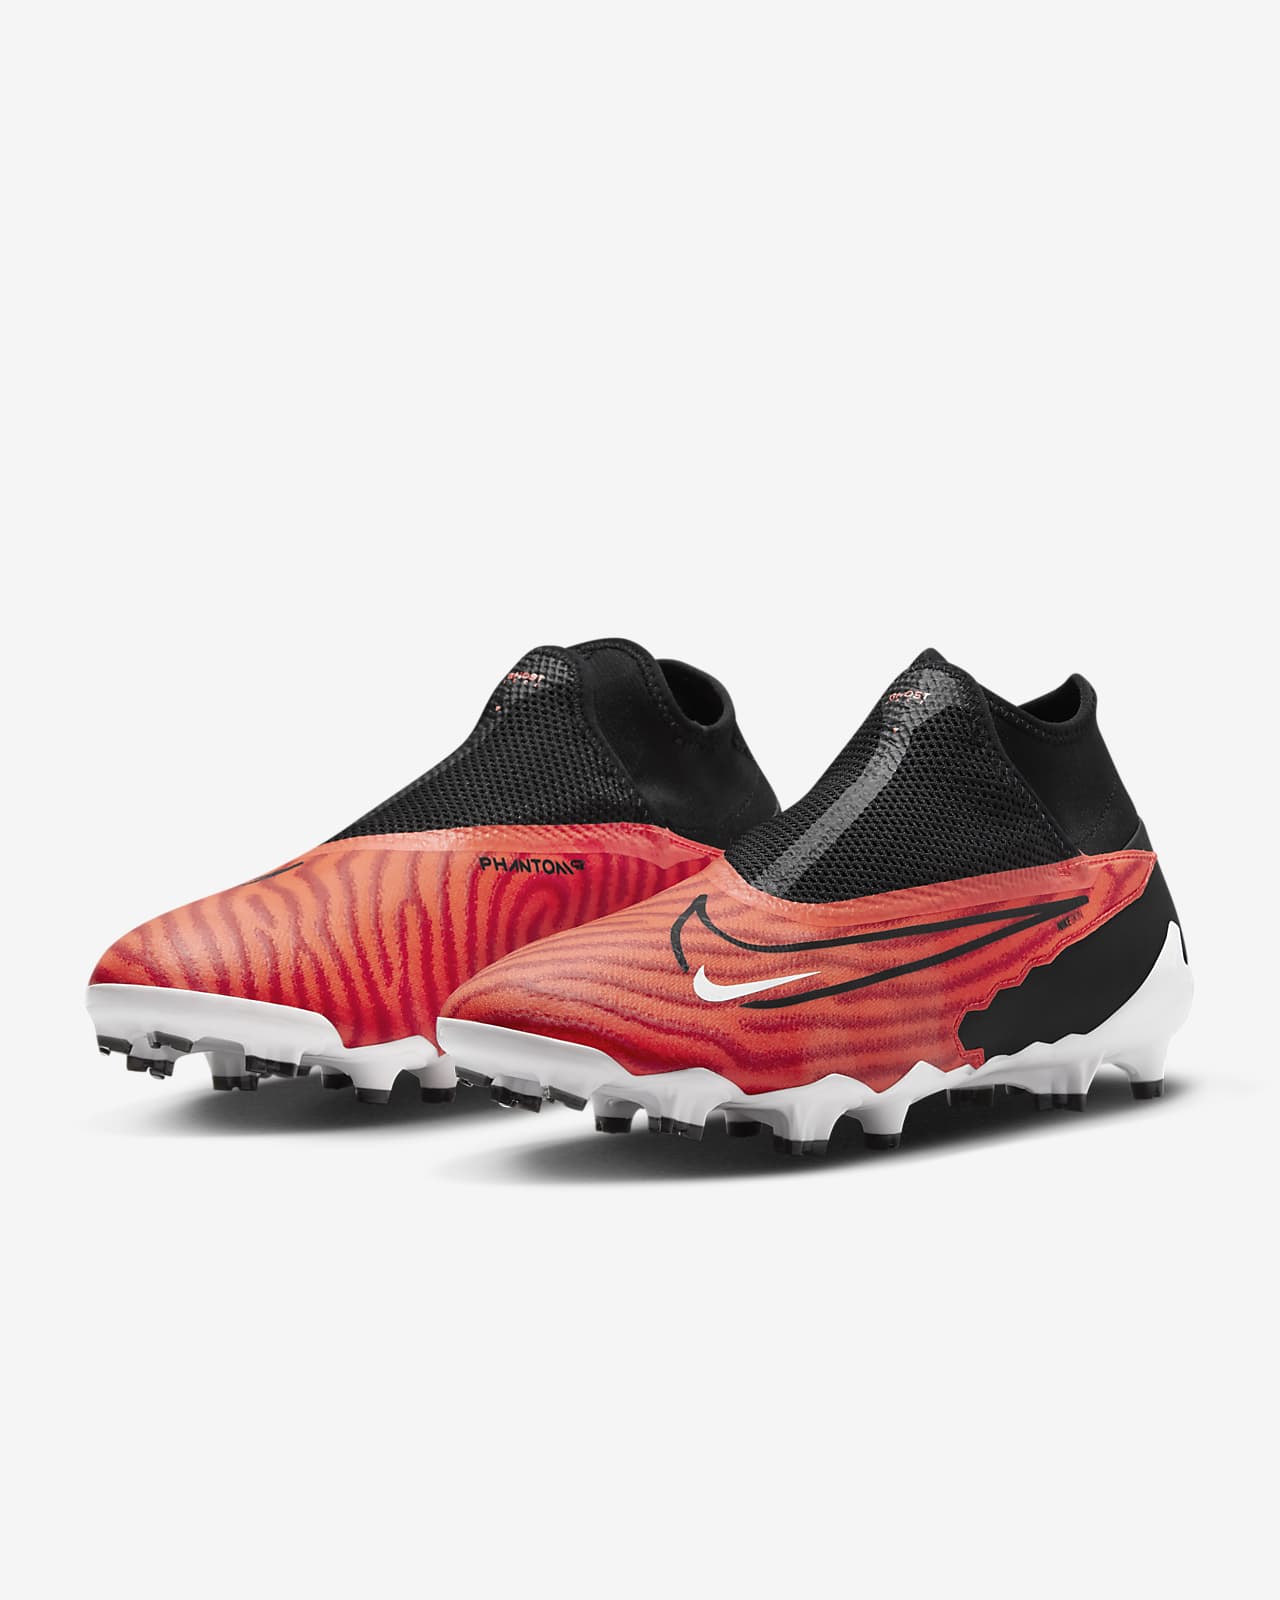 Nike Phantom Vision 2 React Pro Indoor Future Lab Pack Review - Soccer  Reviews For You